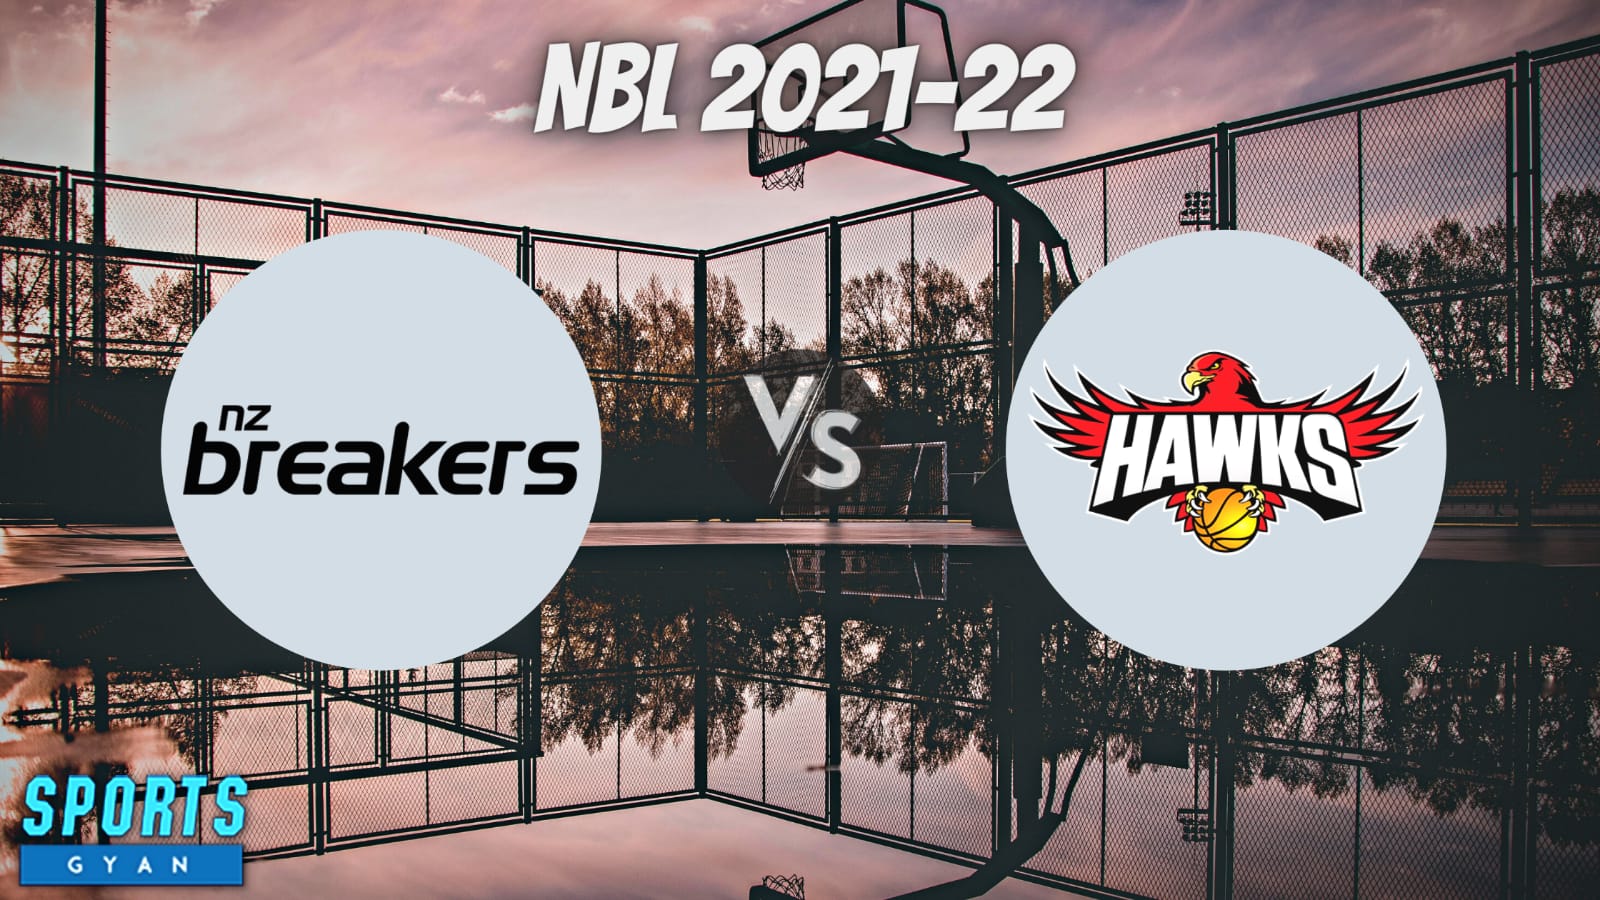 NZB vs ILH Dream 11 Prediction, Player stats, Playing 11, Dream11 team and Injury Update!